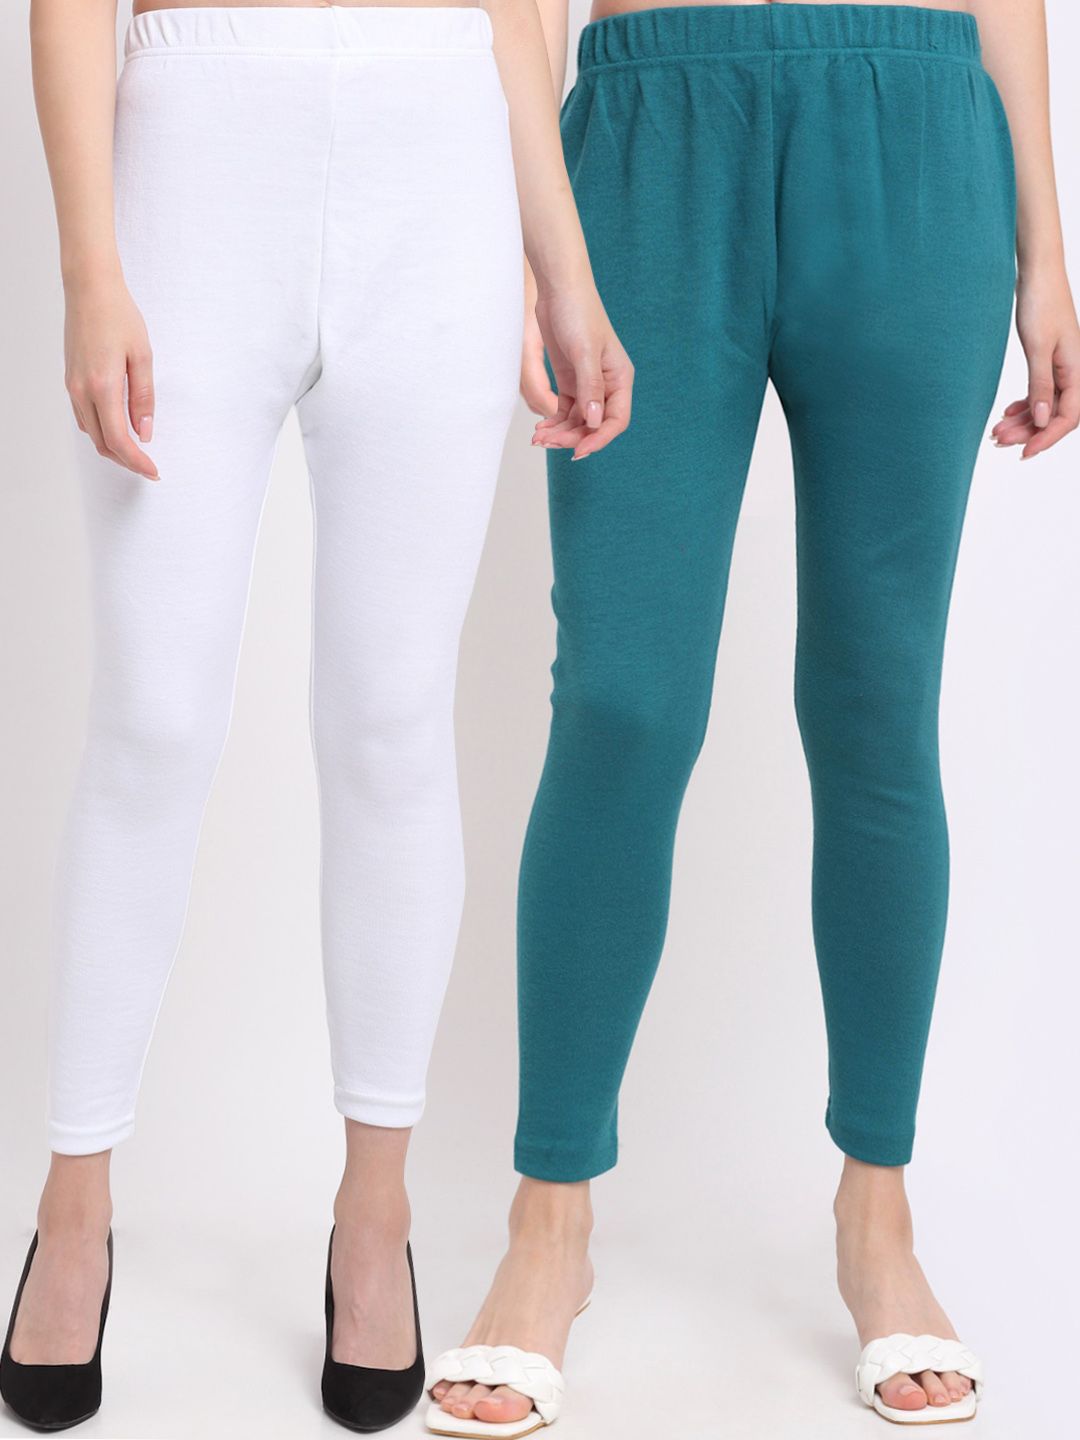 TAG 7 Women Pack Of 2 Solid Turquoise Blue & White Ankle Length Leggings Price in India